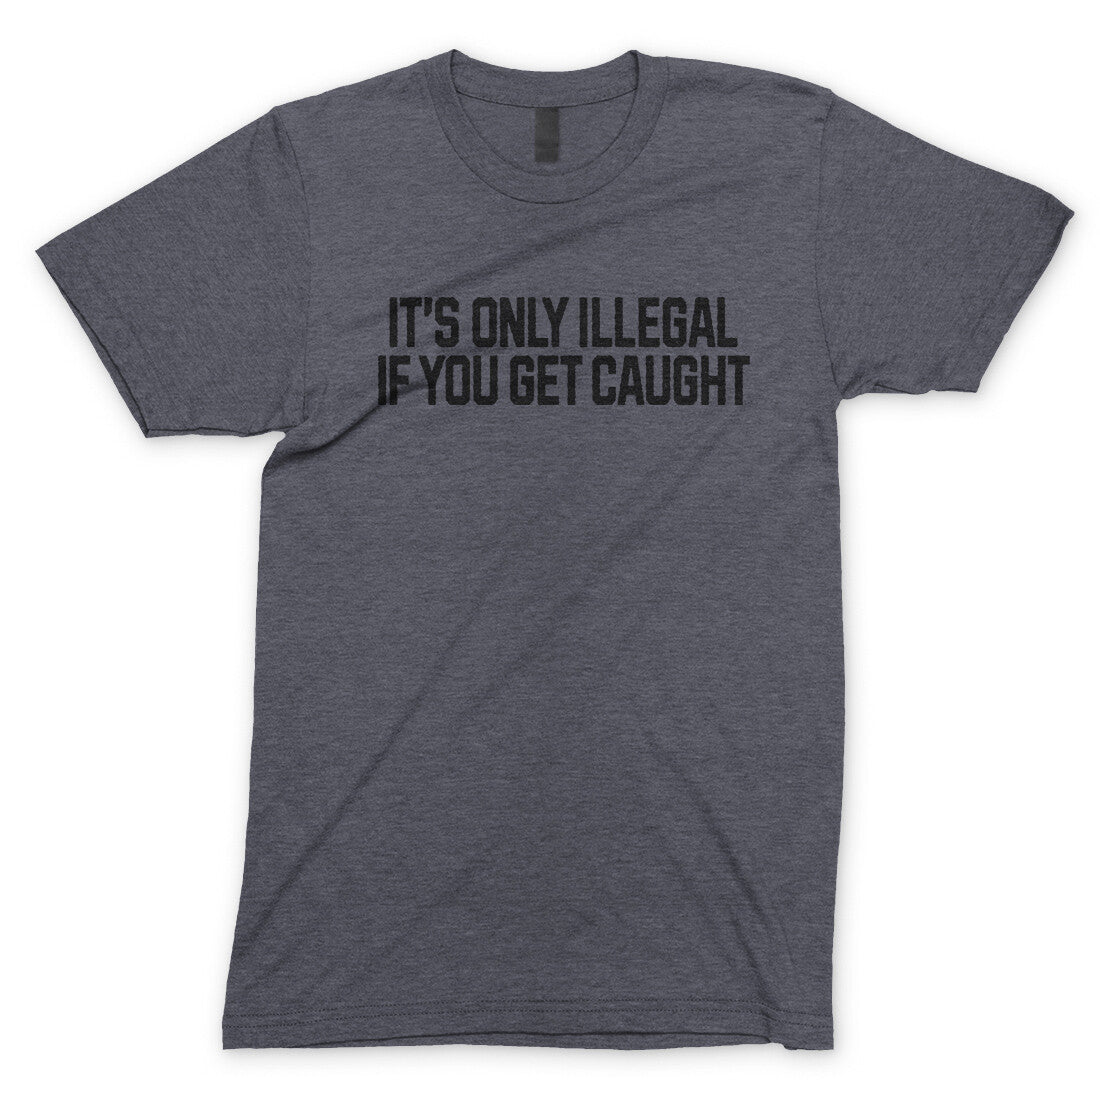 It’s Only Illegal If You Get Caught in Dark Heather Color